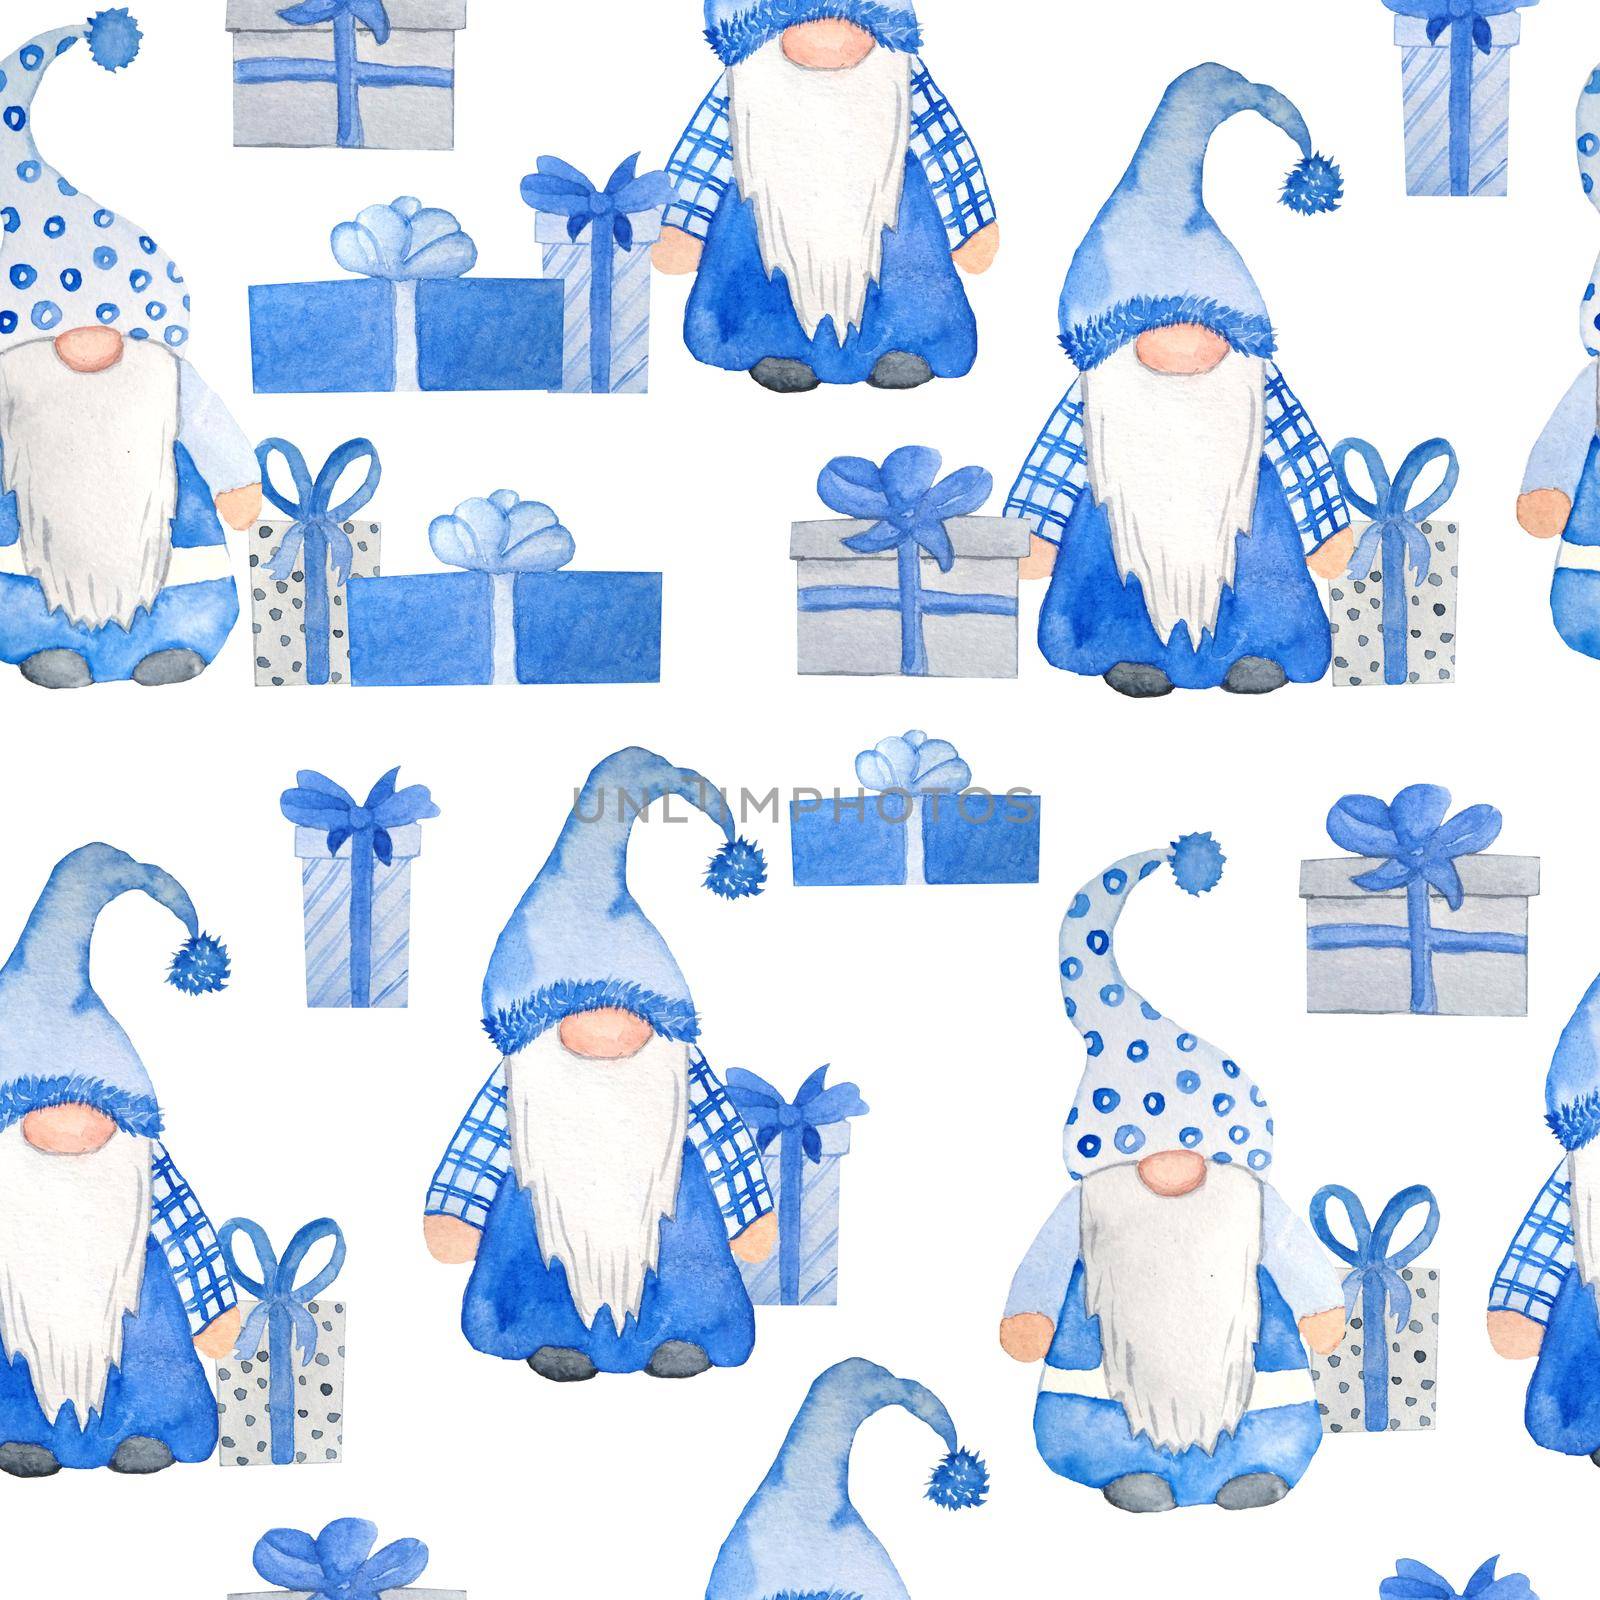 Watercolor hand drawn seamless pattern nordic scandinavian gnomes for christmas decor gifts presents. New year illustration in blue grey cartoon style. Funny winter character north swedish elf in hat beard. Greeting card